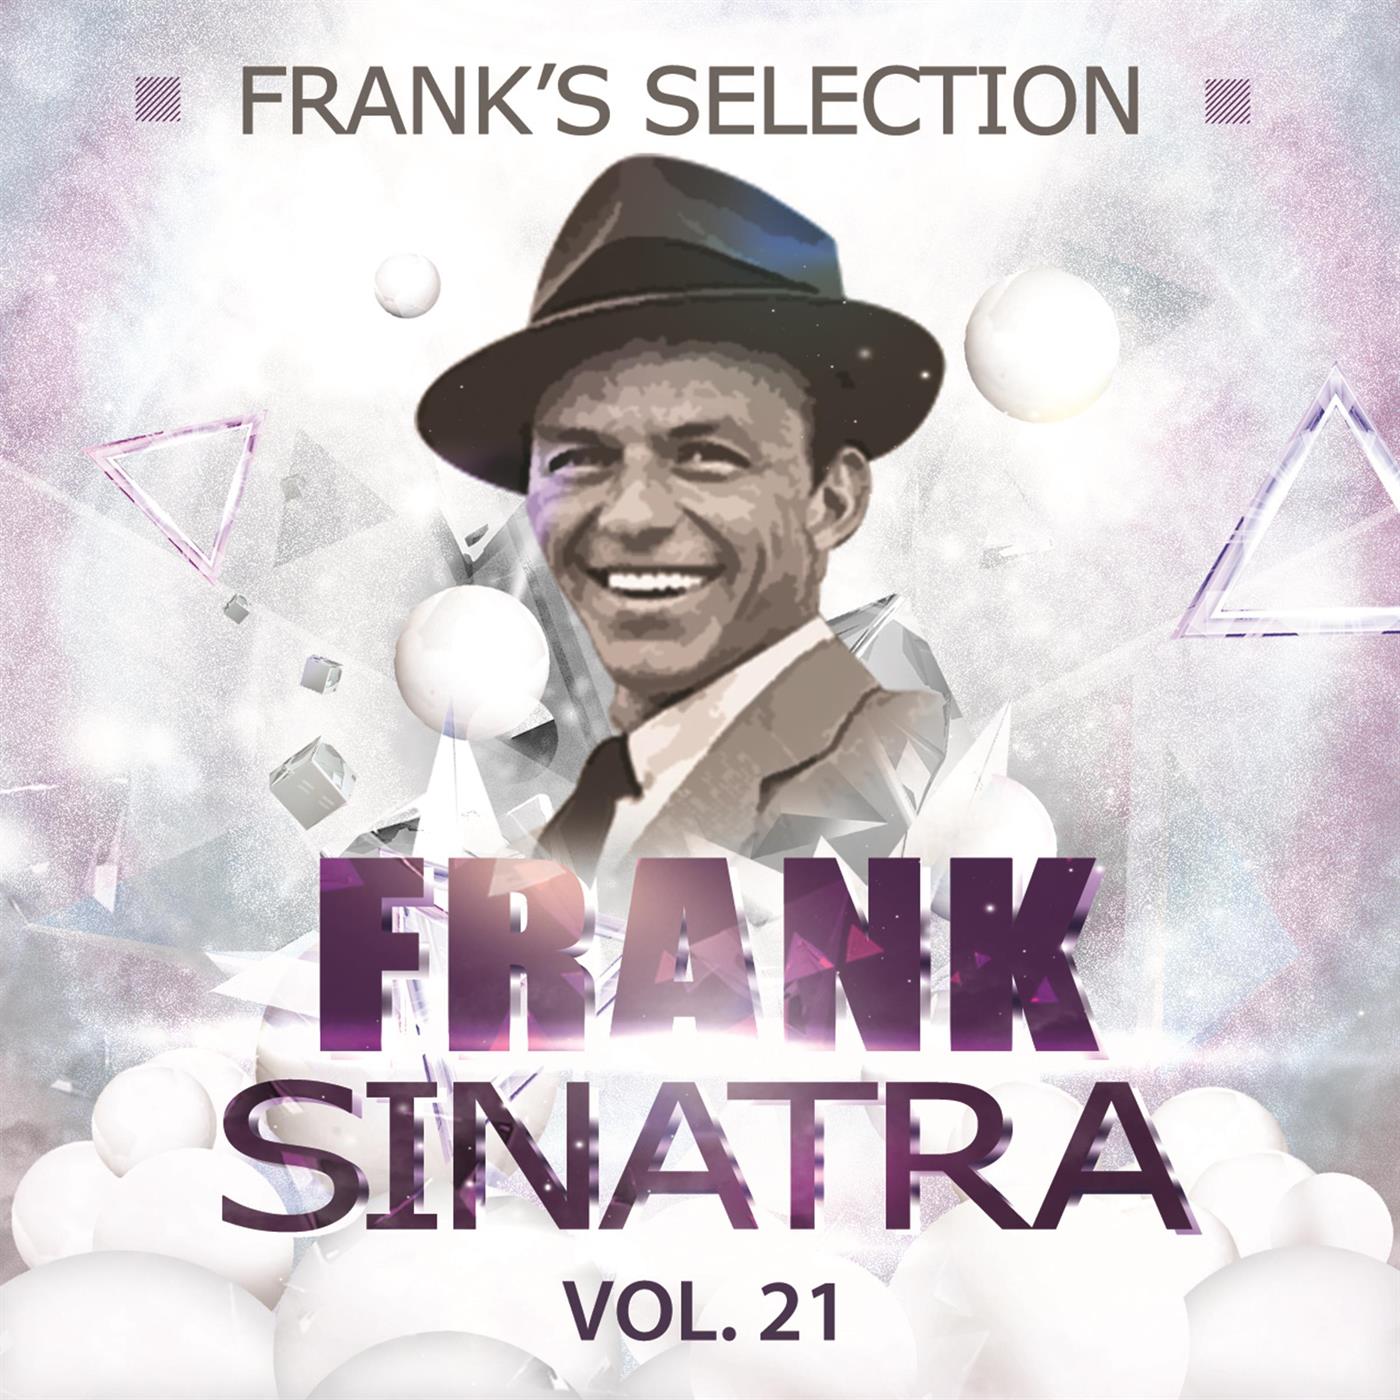 Frank's Selection Vol. 21